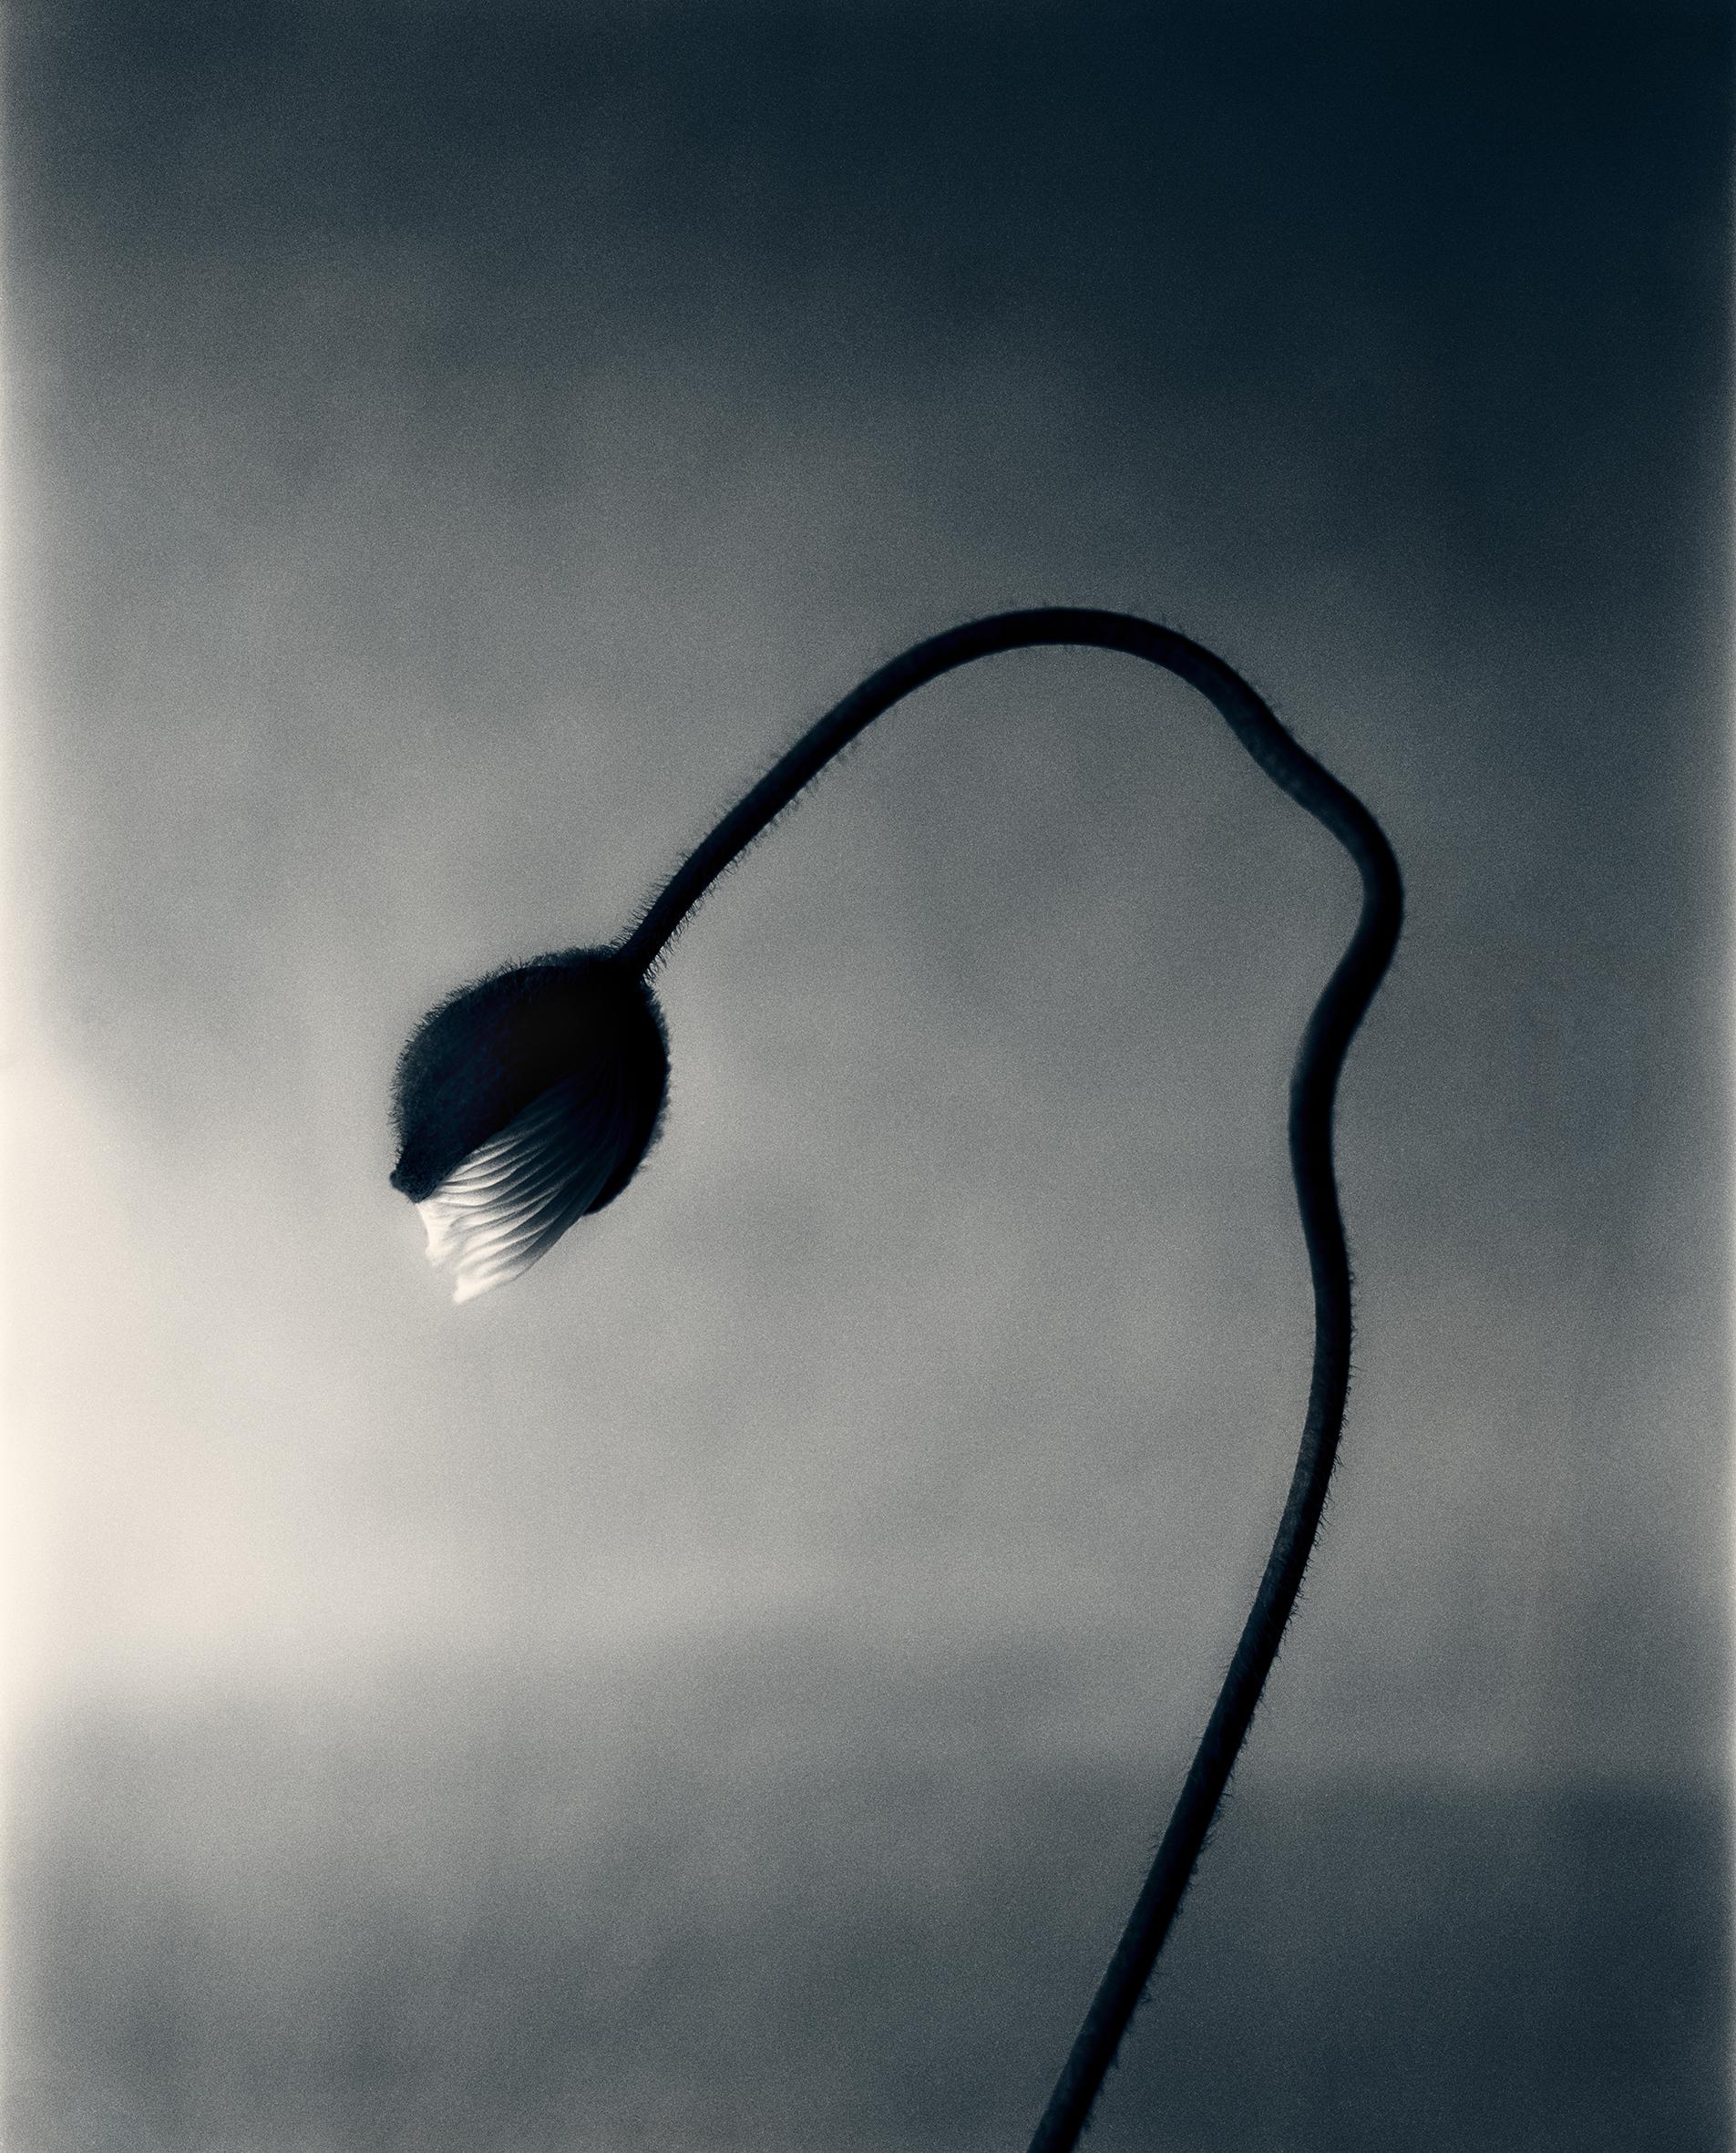 Poppy bud - Analogue floral photography, Limited edition of 10